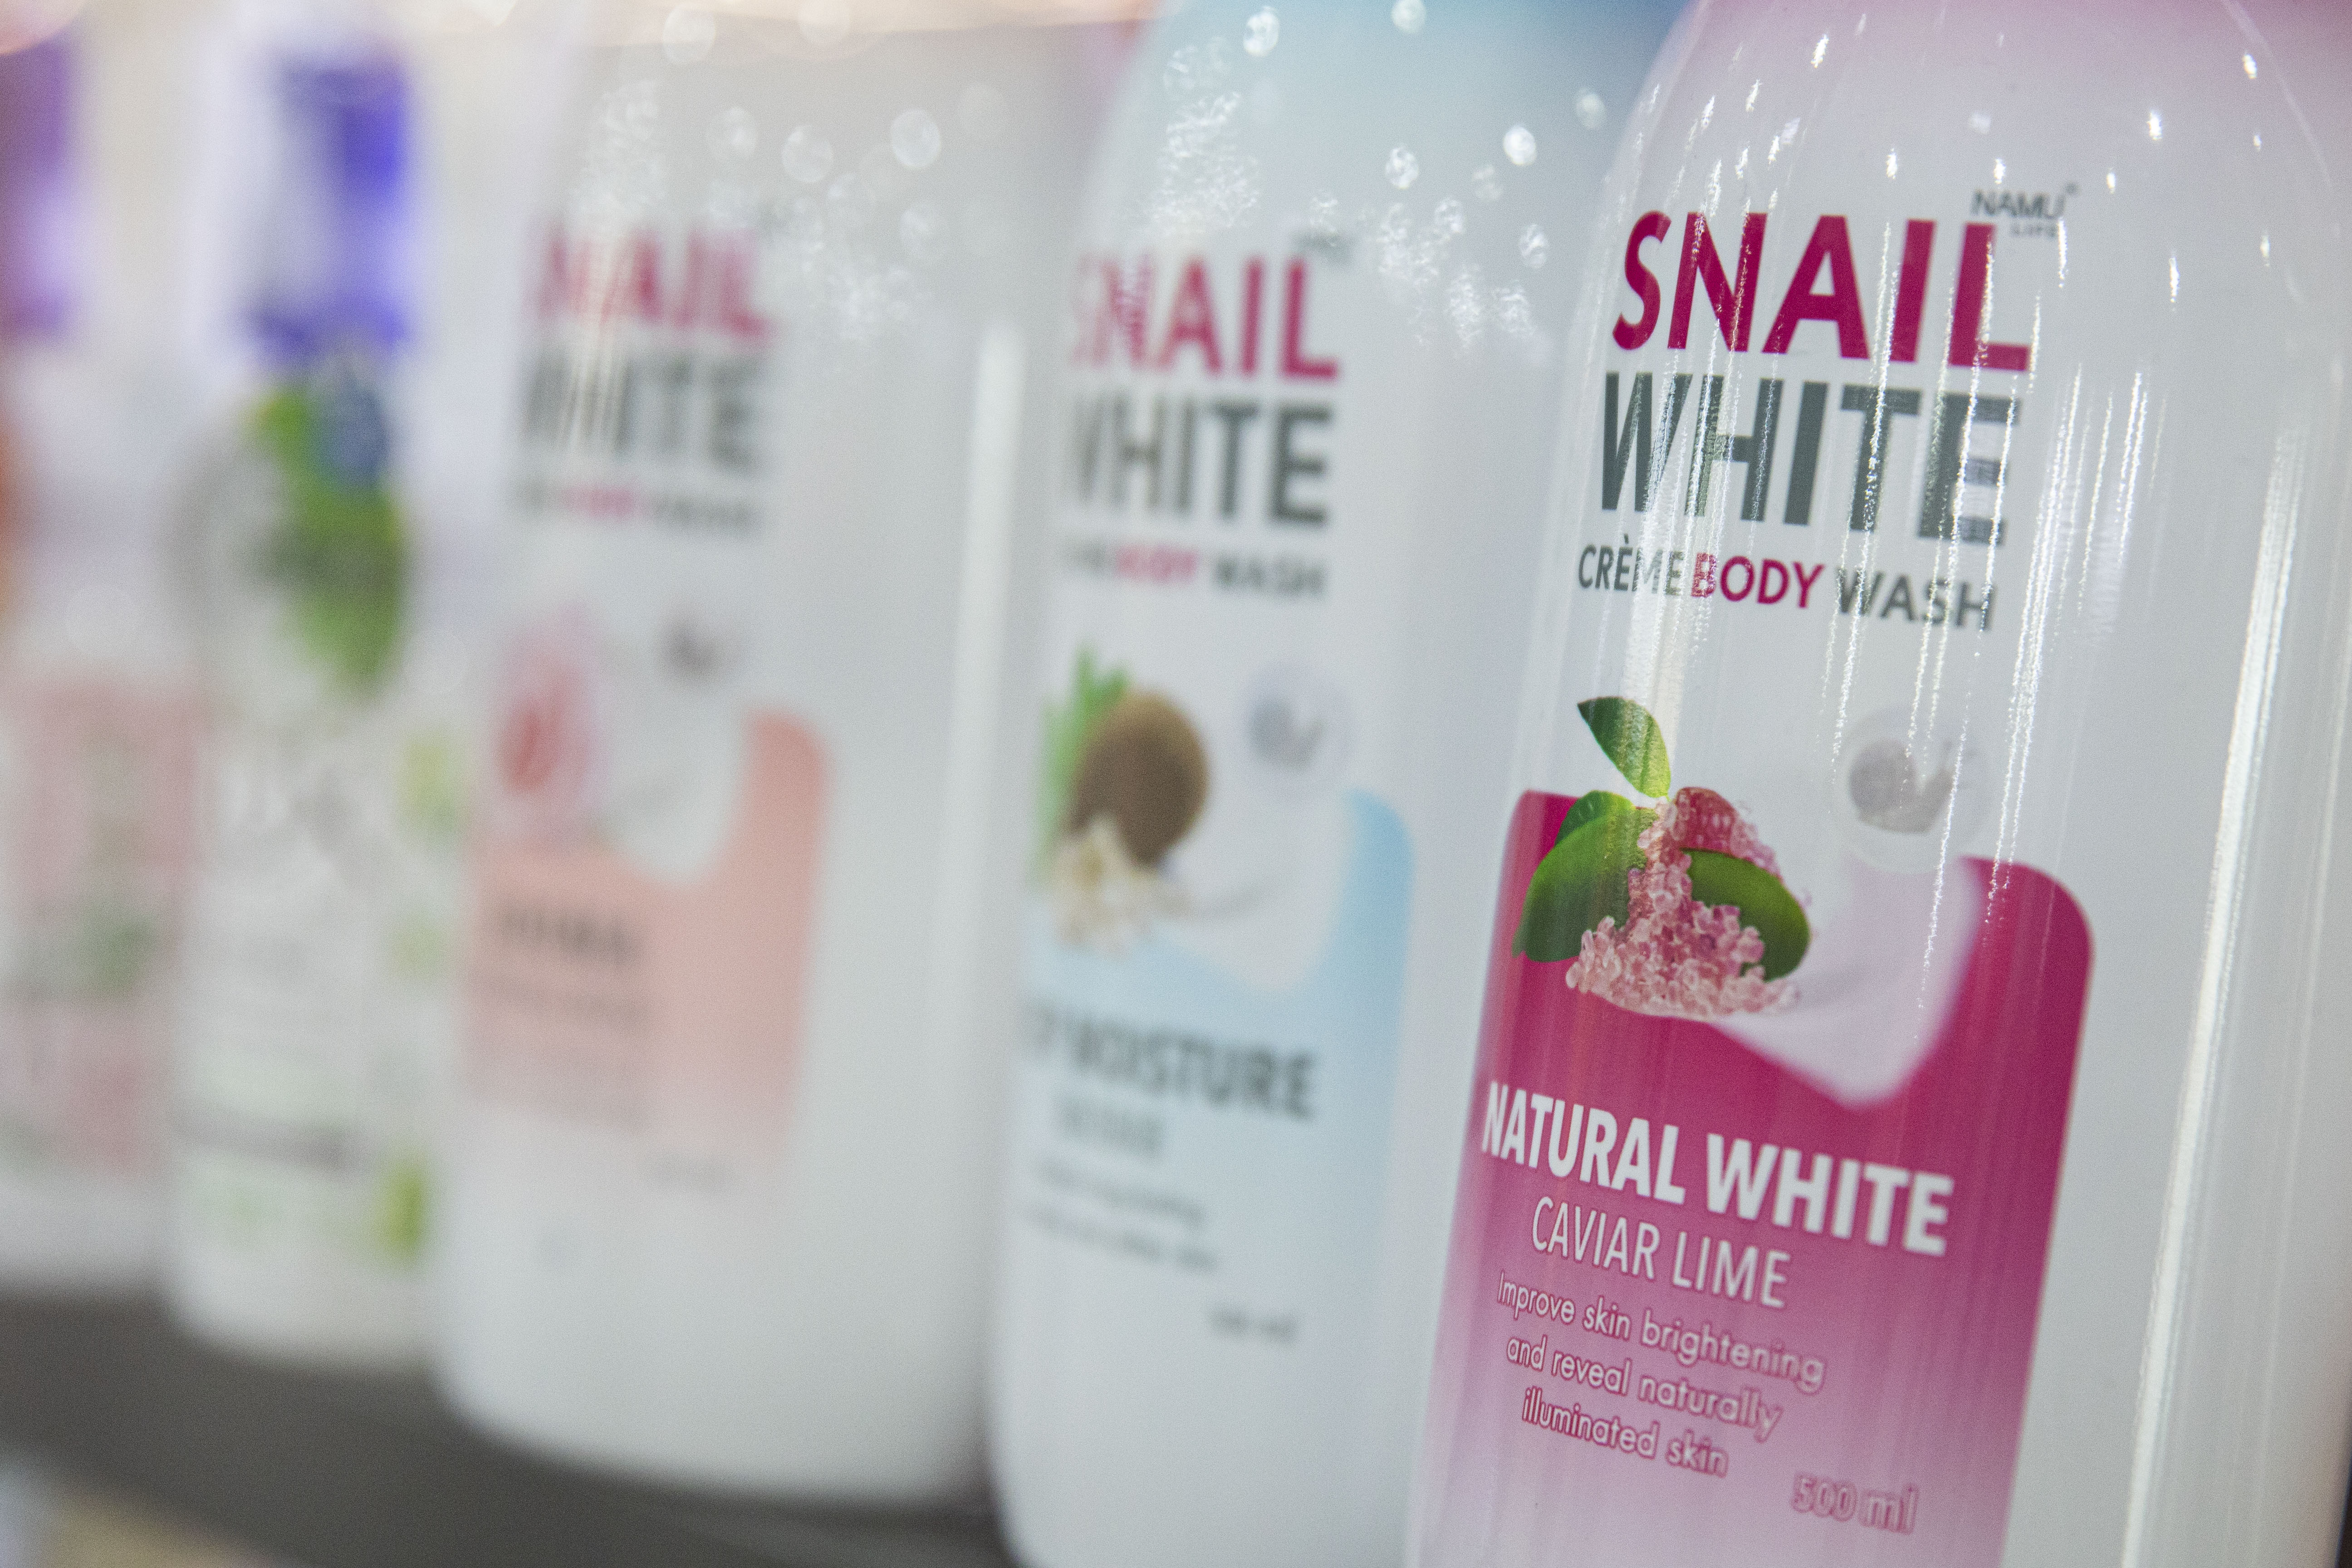 Bottles of Namu Life Snail White Creme Body Wash pictured on the shelf of a cosmetics store on September 5, 2021 in Bangkok, Thailand | Source: Getty Images